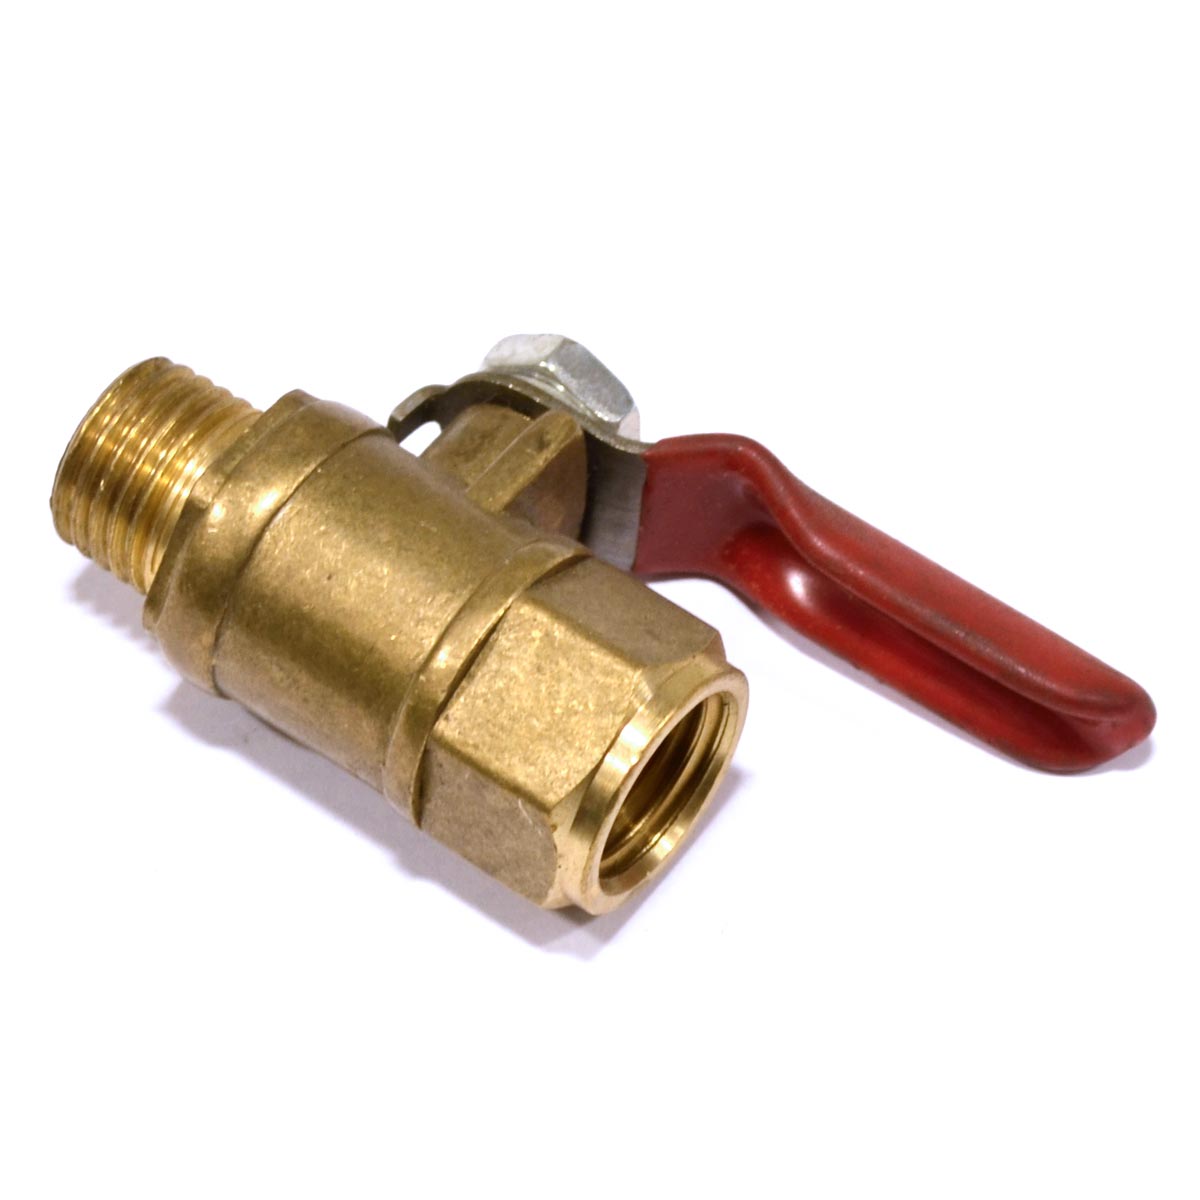 Lever Handle,NPT Male to Male Shut Off Valve 1/4"inch Red Brass Ball Valve 